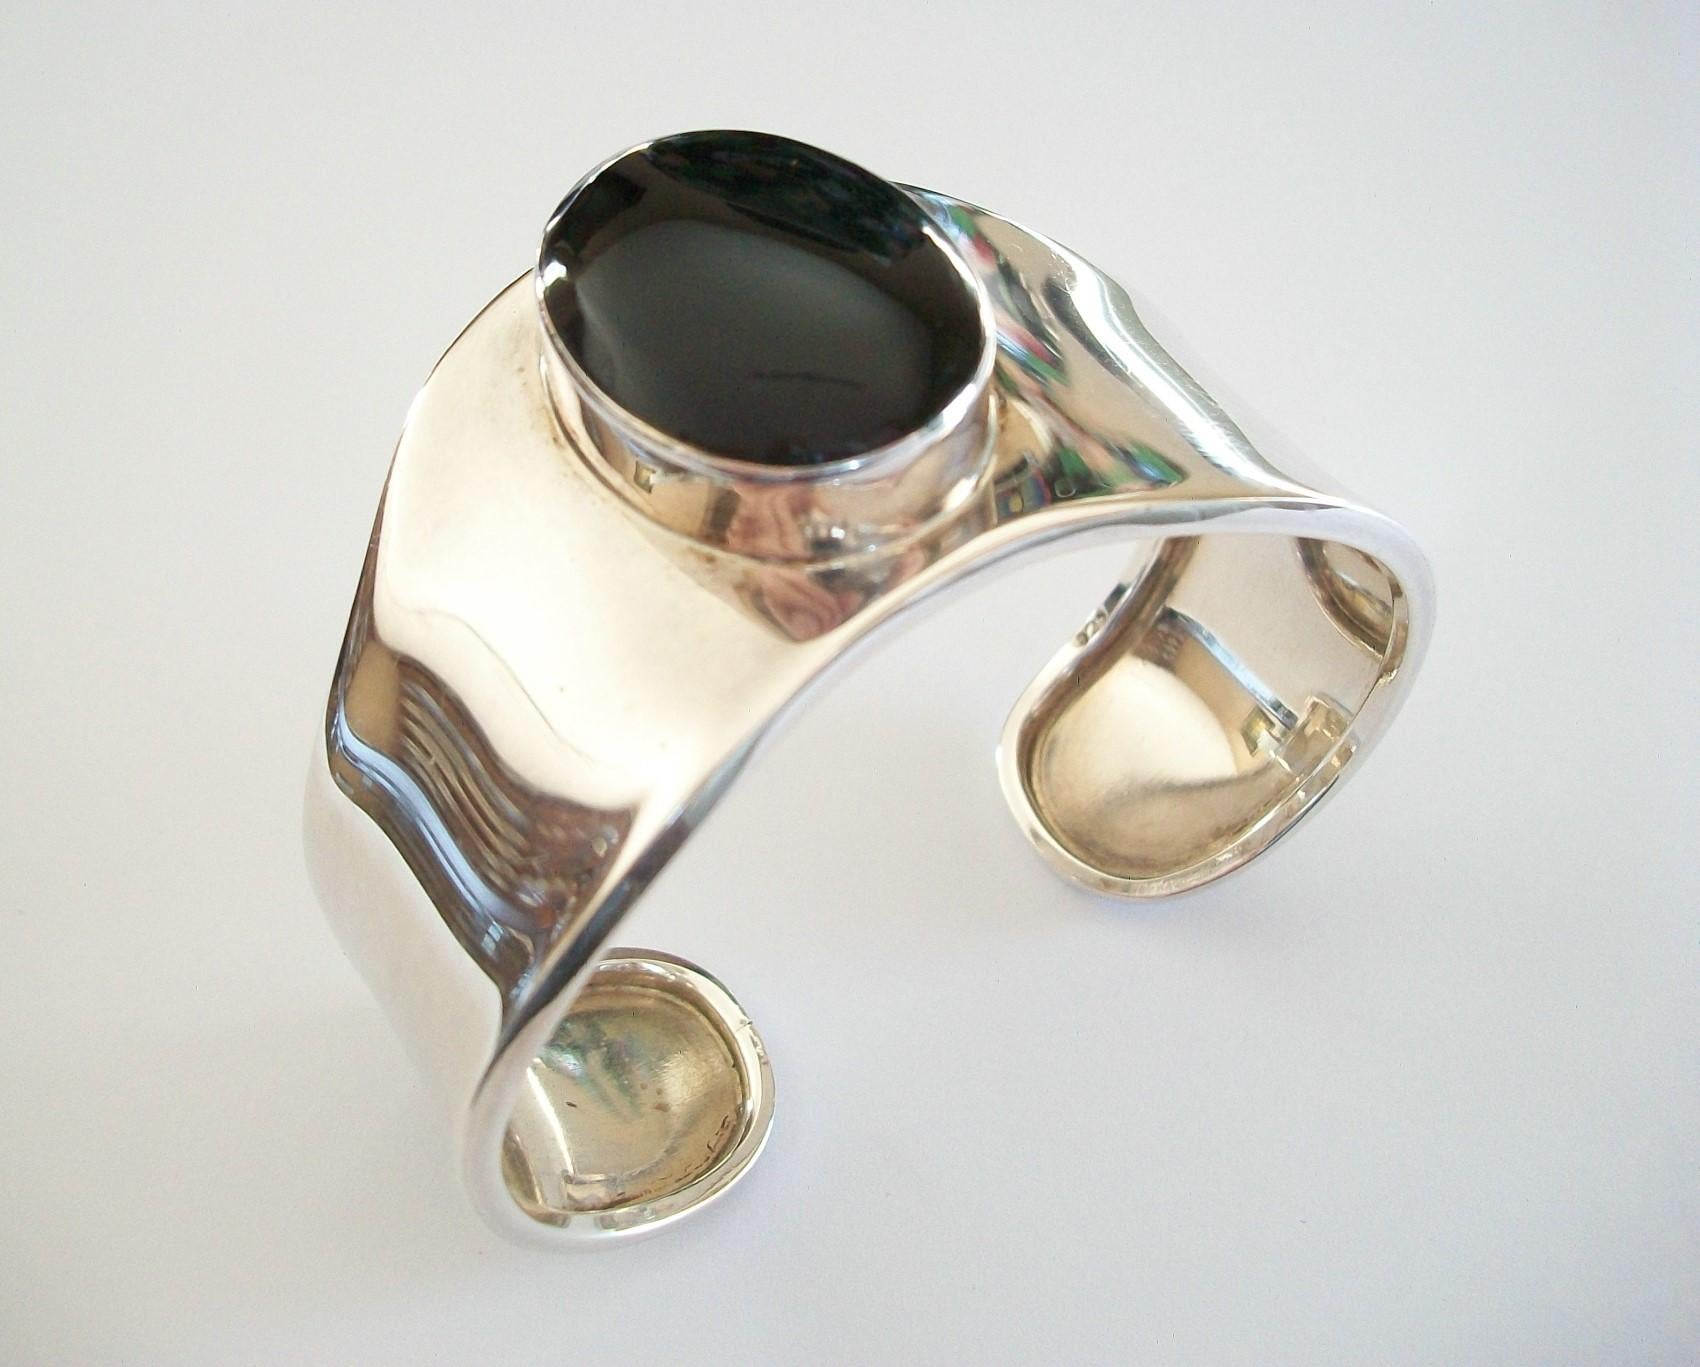 Oval Cut Modernist Onyx & Sterling Silver Bracelet, United States, Late 20th Century